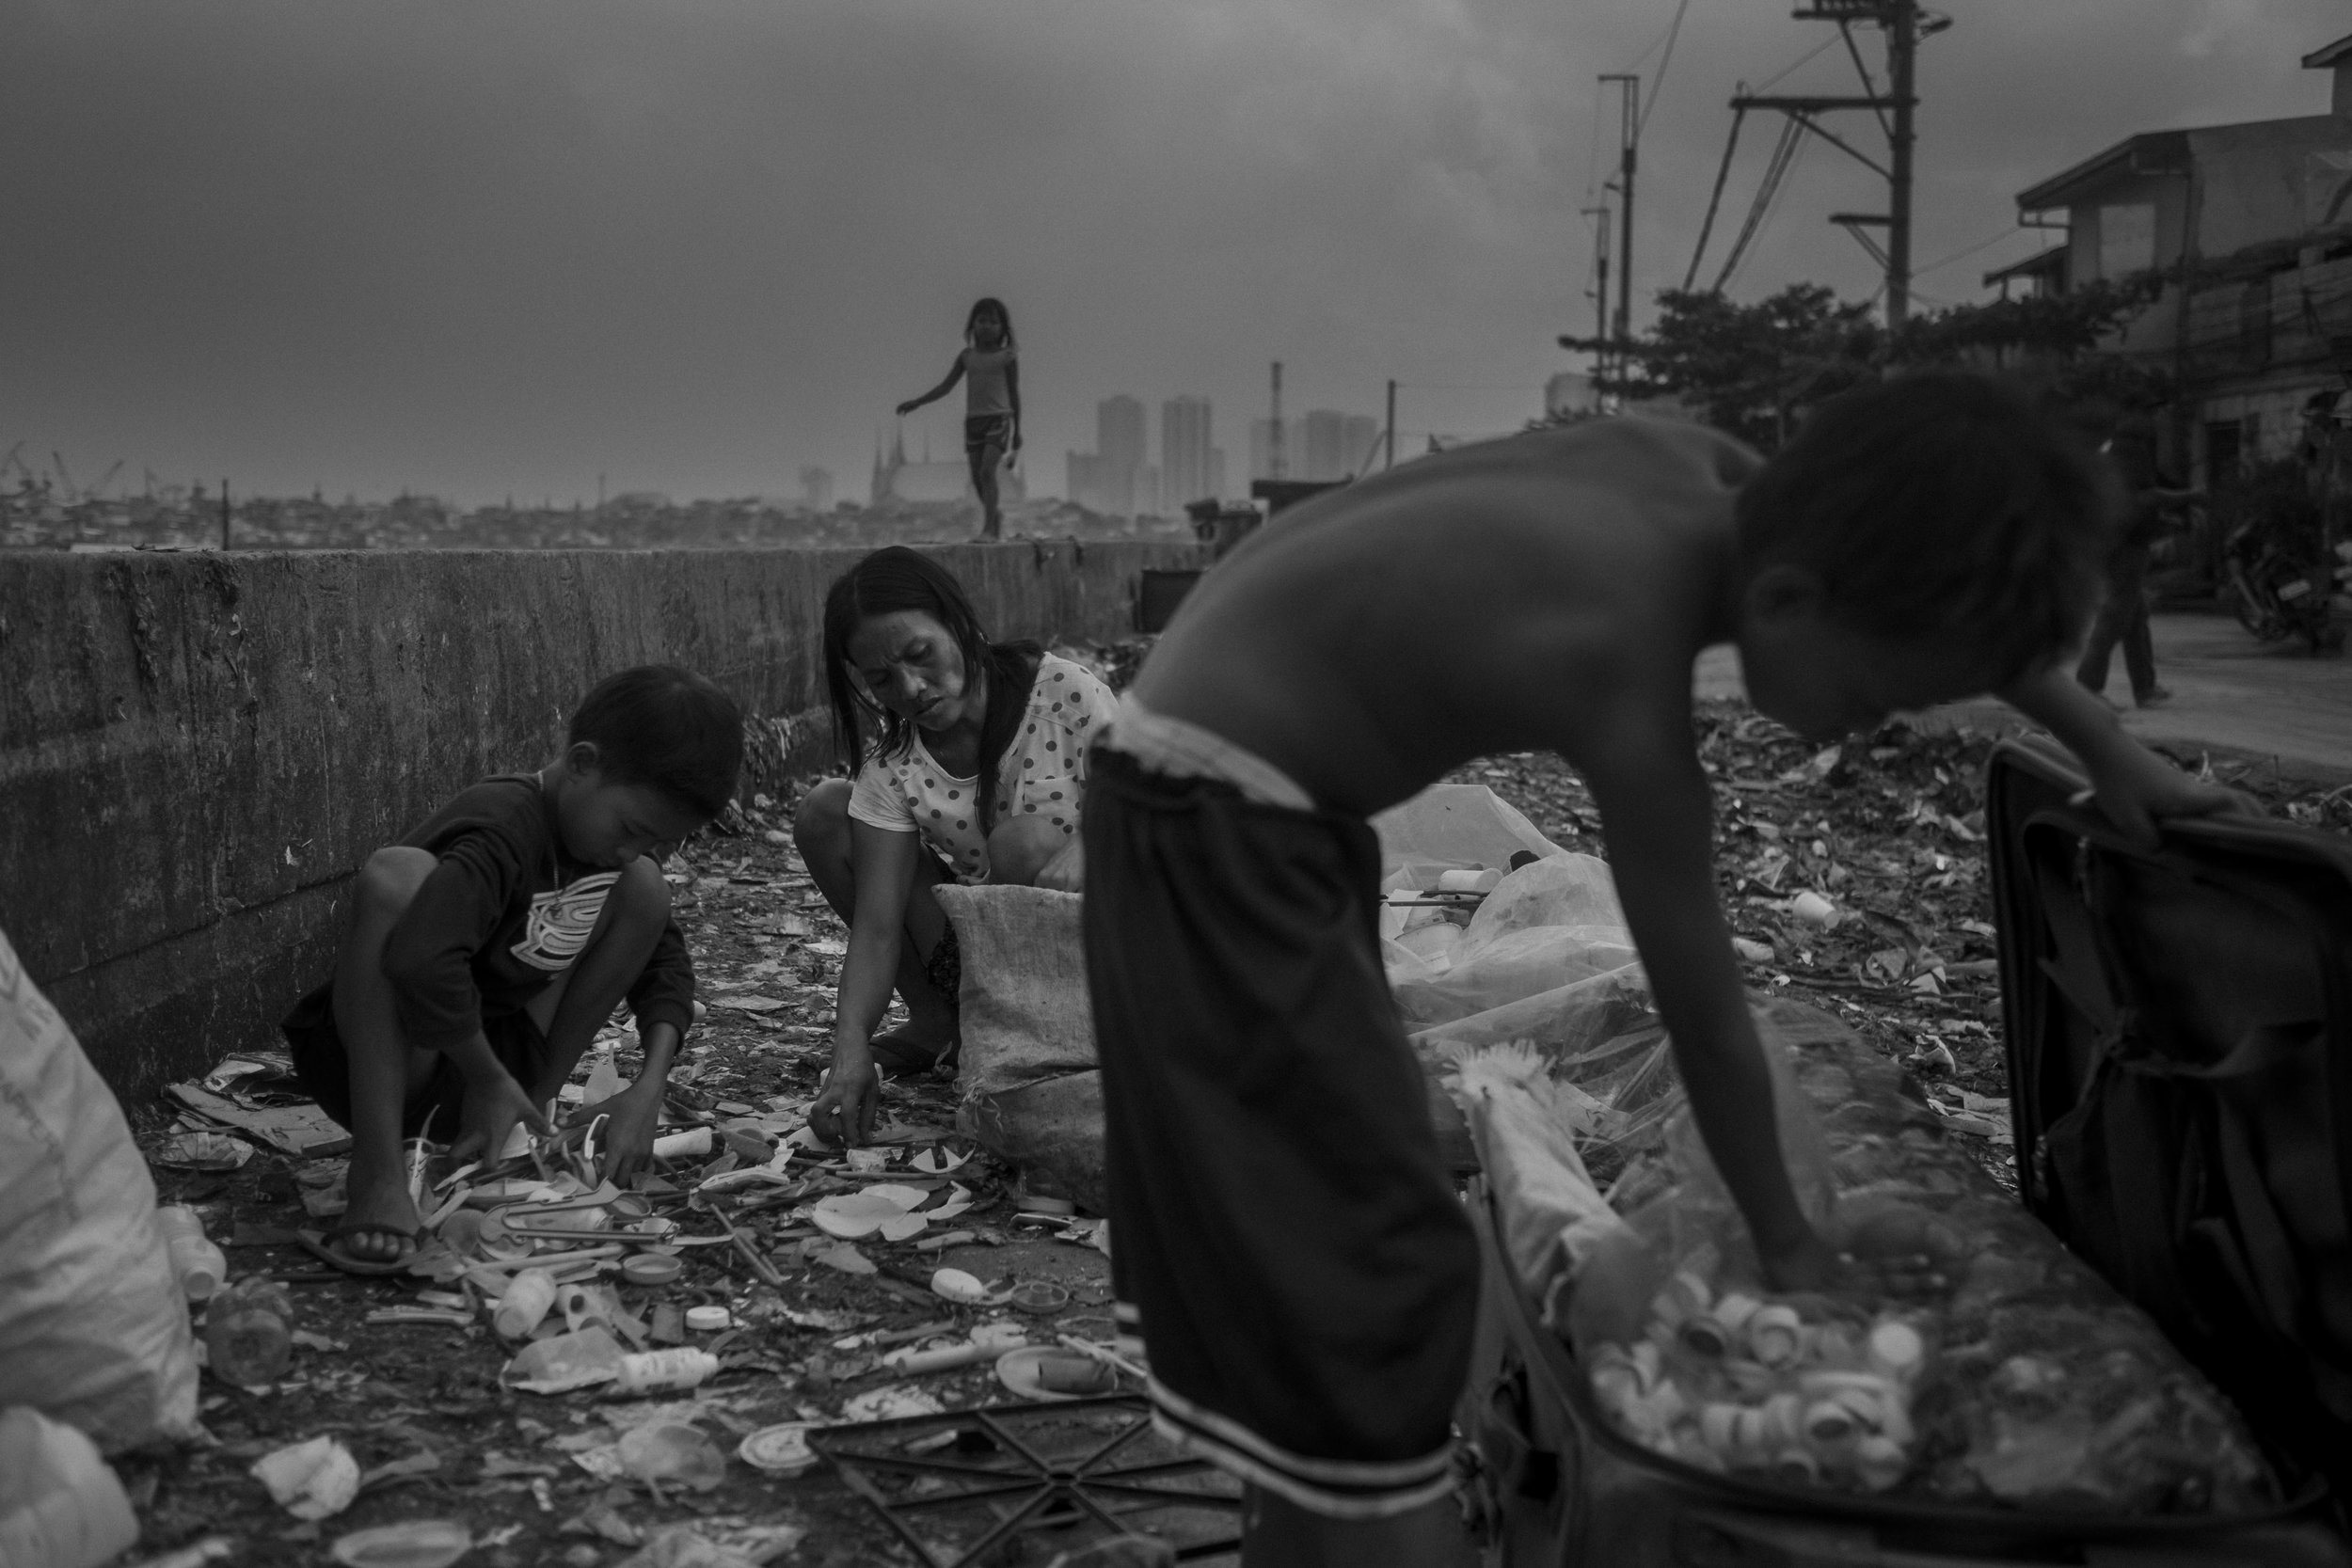  Jocelyn Balbin and her sons Mark and Reynaldo collect water caps and other recyclable materials, next to Pasig River, in Manila, Philippines. 